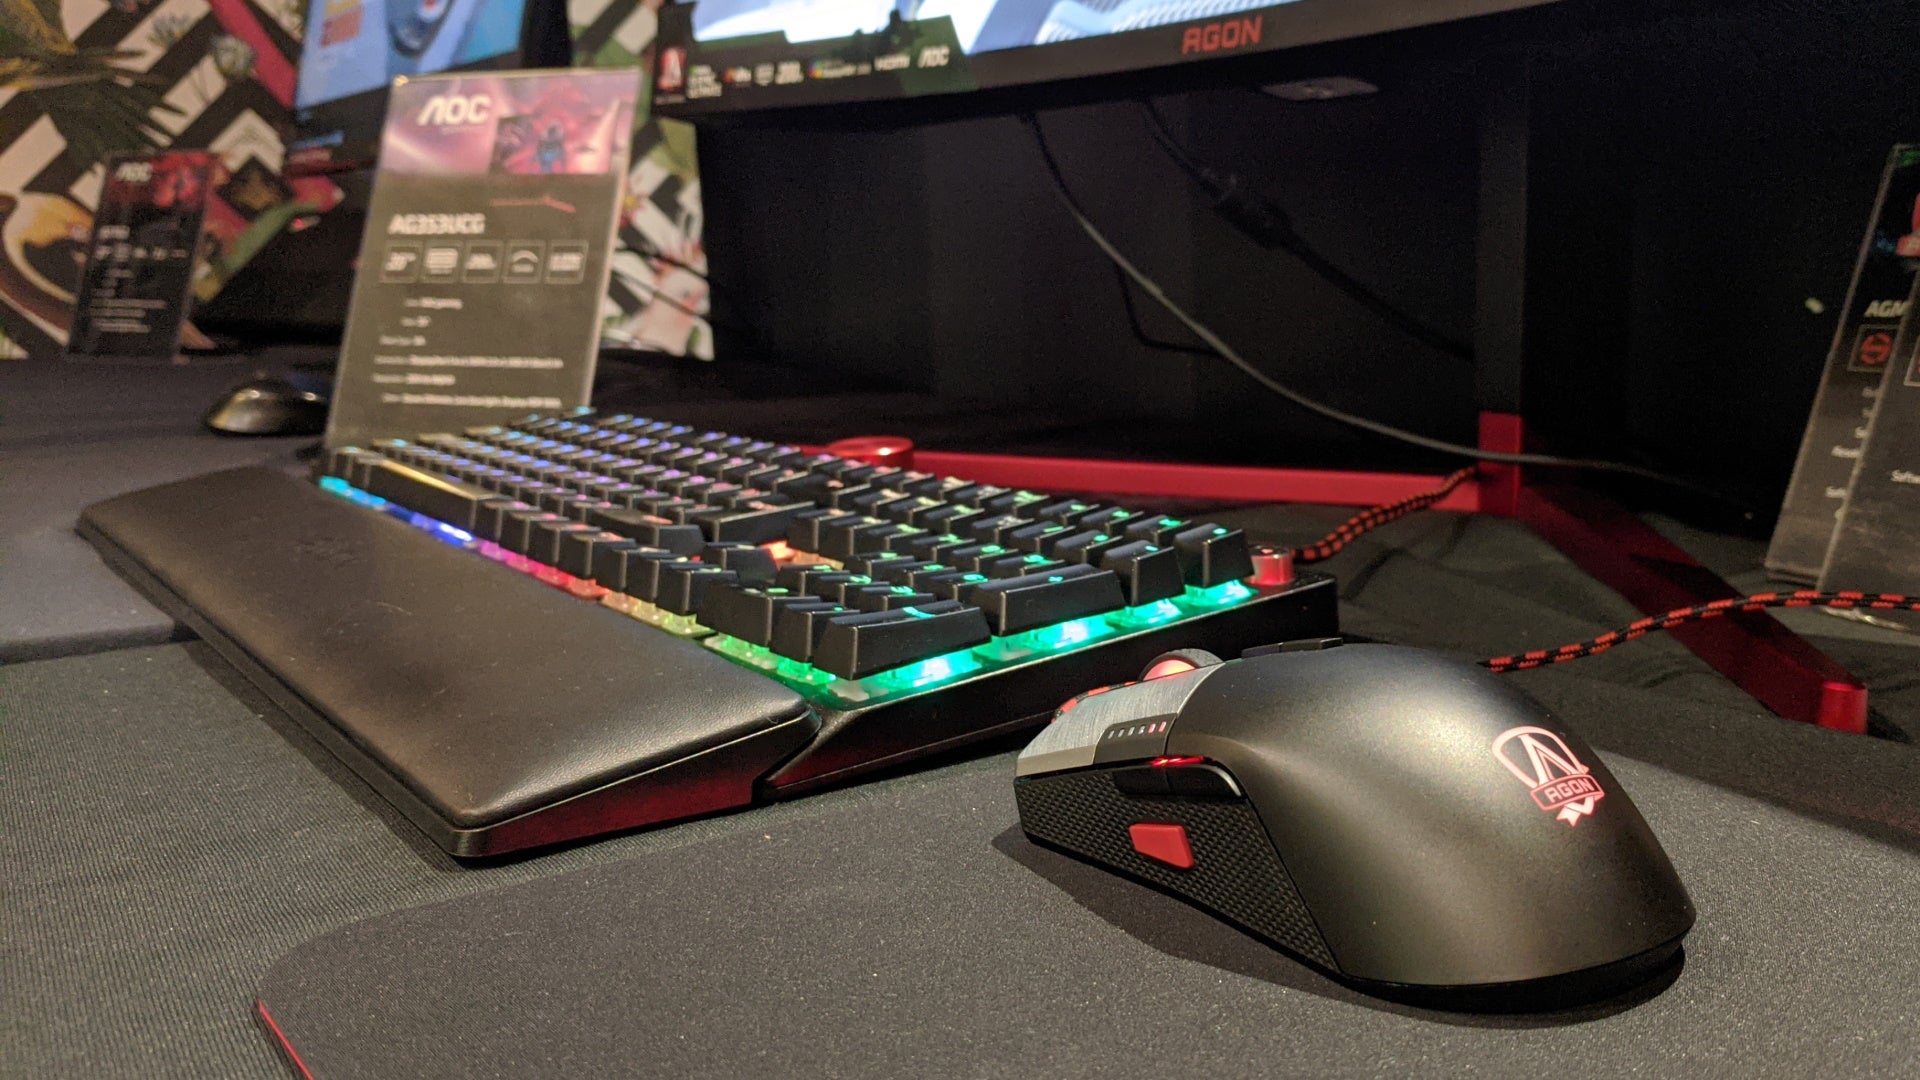 Image for Monitor maker AOC are also making mice and keyboards now